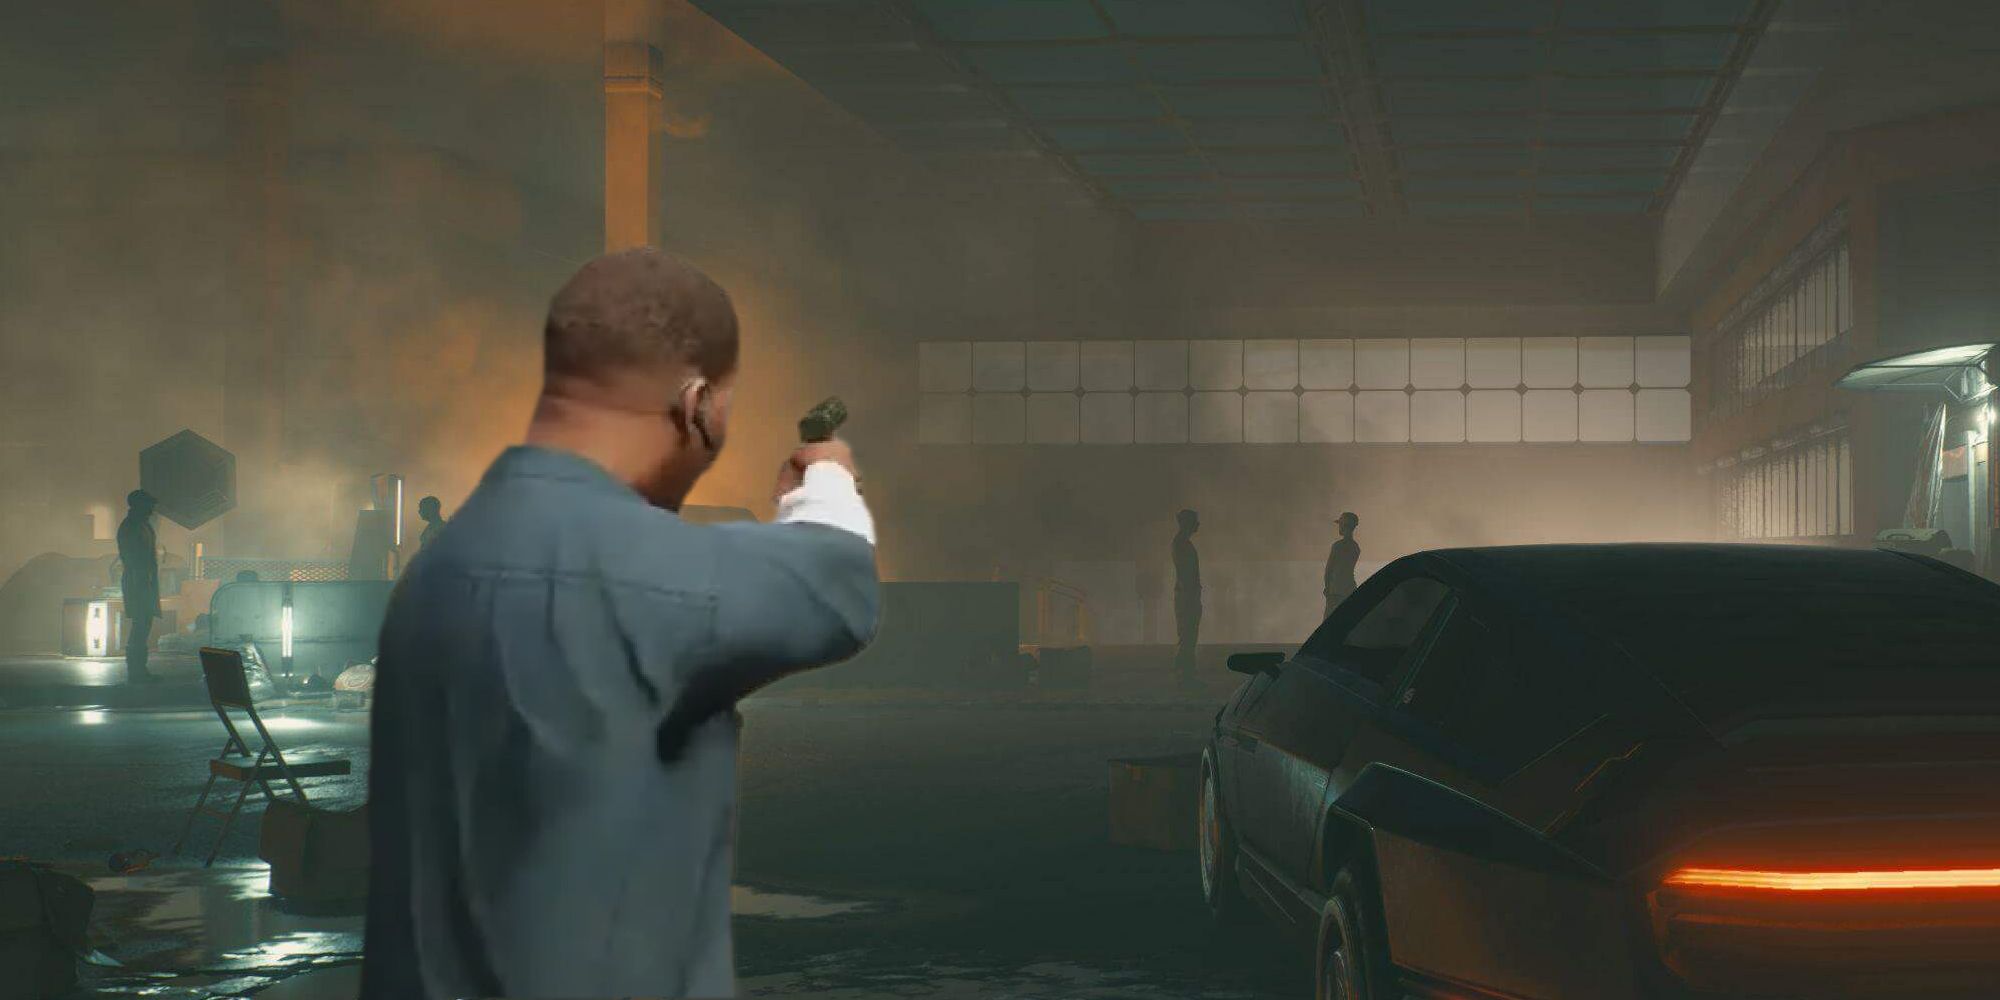 Franklin from GTA 5 pointing a pistol in a warehouse in Cyberpunk 2077.